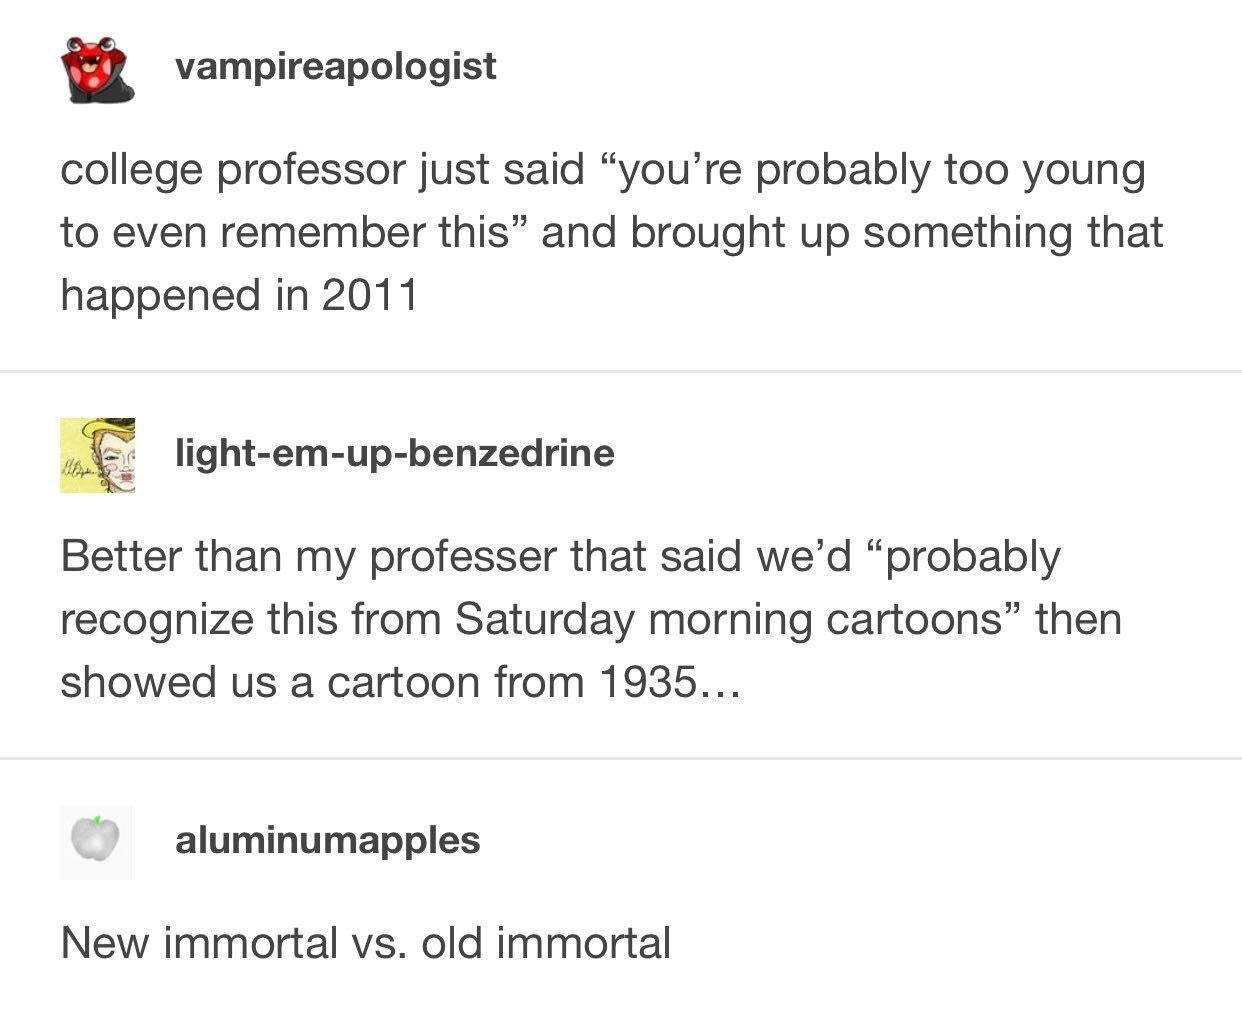 college professor says &#x27;you&#x27;re probably too young to even remember this&#x27; about something that happened in 2011 compared to professor who said students would remember a 1935 cartoon, labeled new immortal vs old immortal 